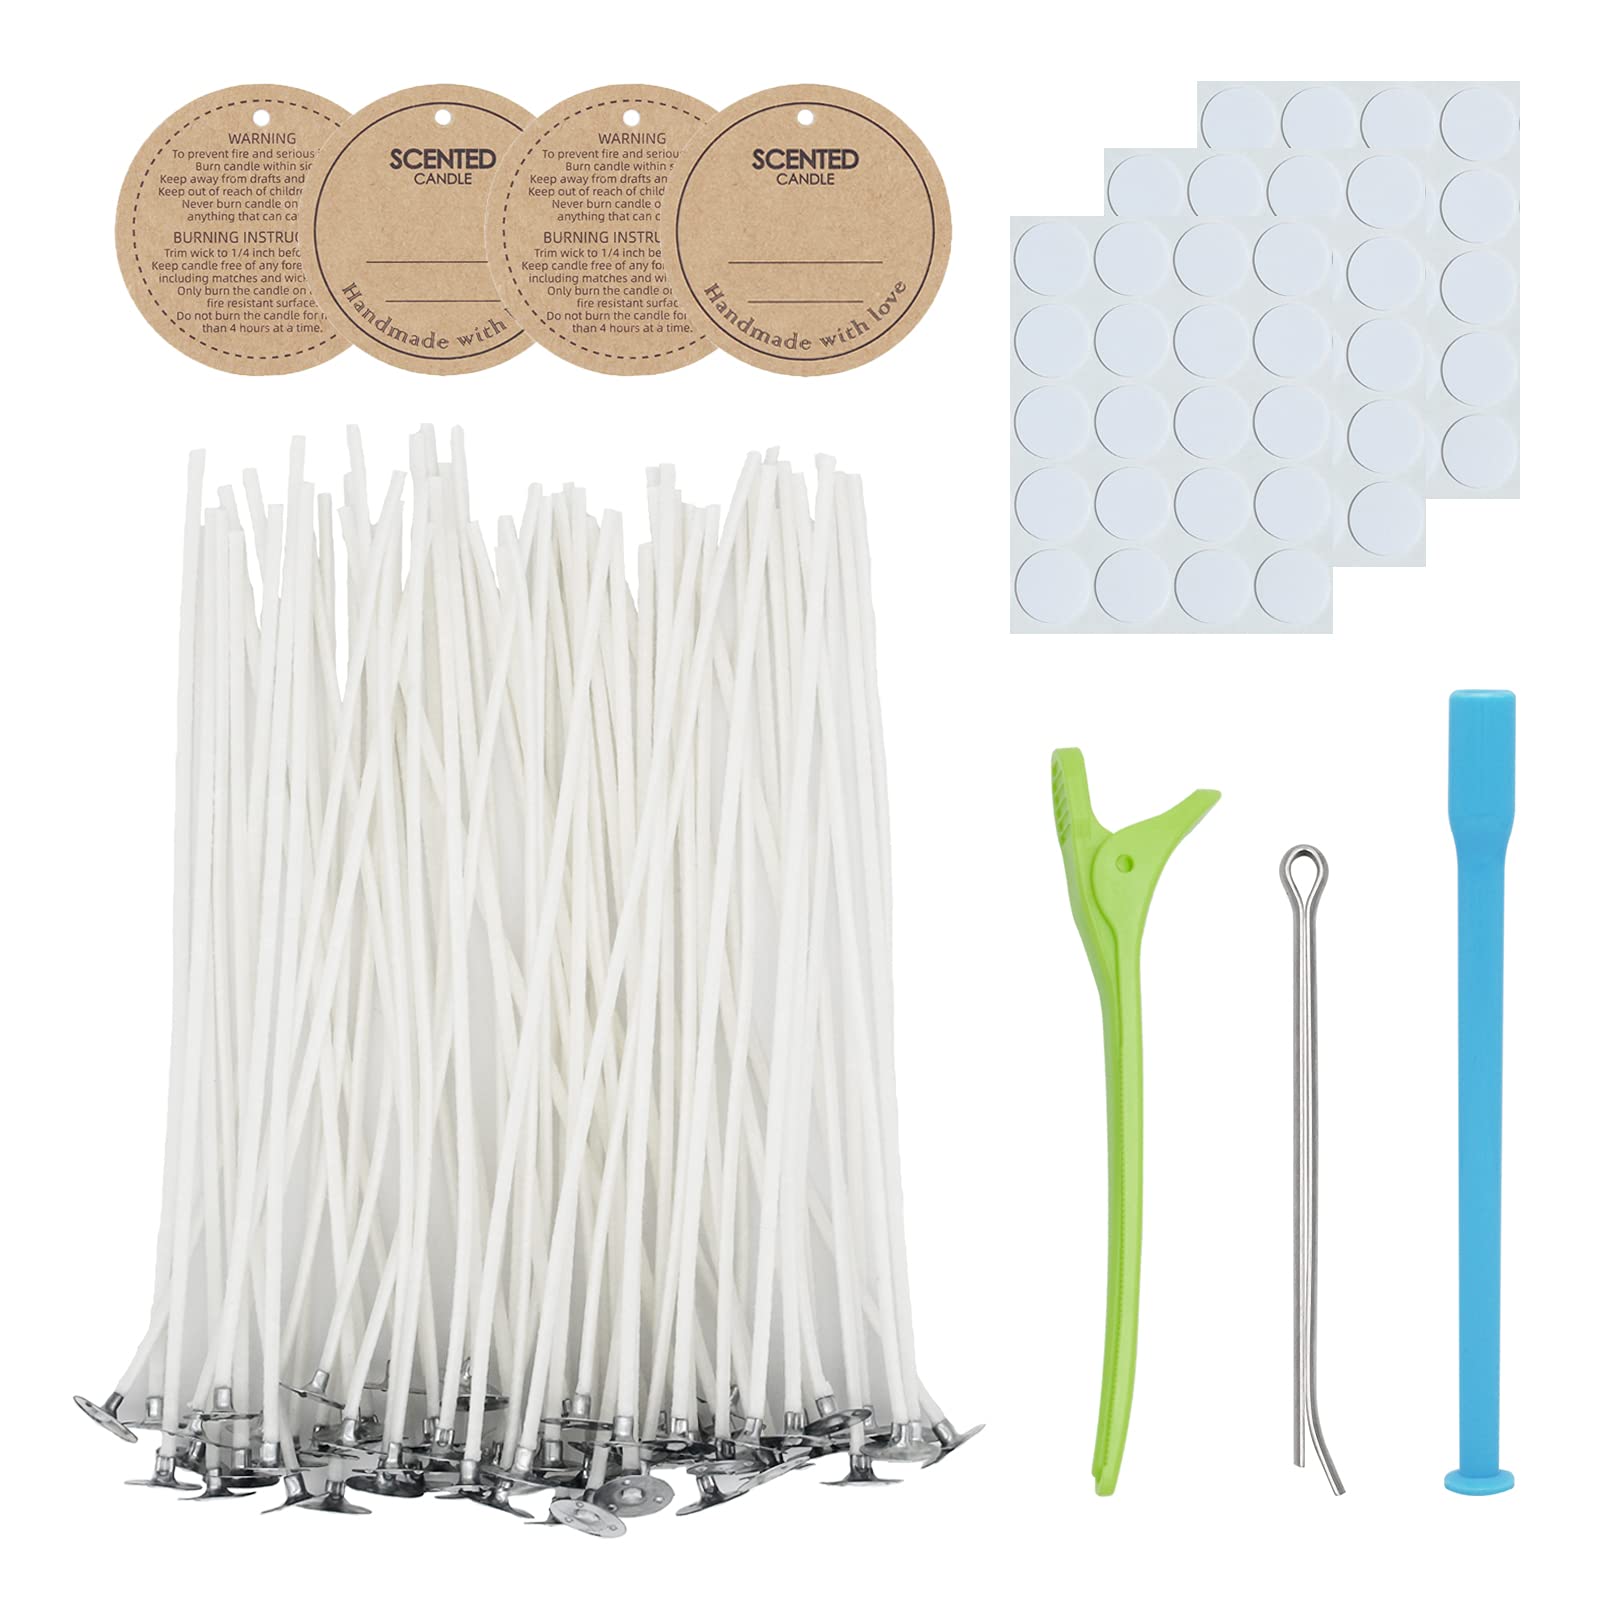 CandMak Candle Wick Kit, 60pcs Candle Wicks with Wick Stickers, Wick  Holders and Candle Tags for Candle Making (Thick 4+6+8)